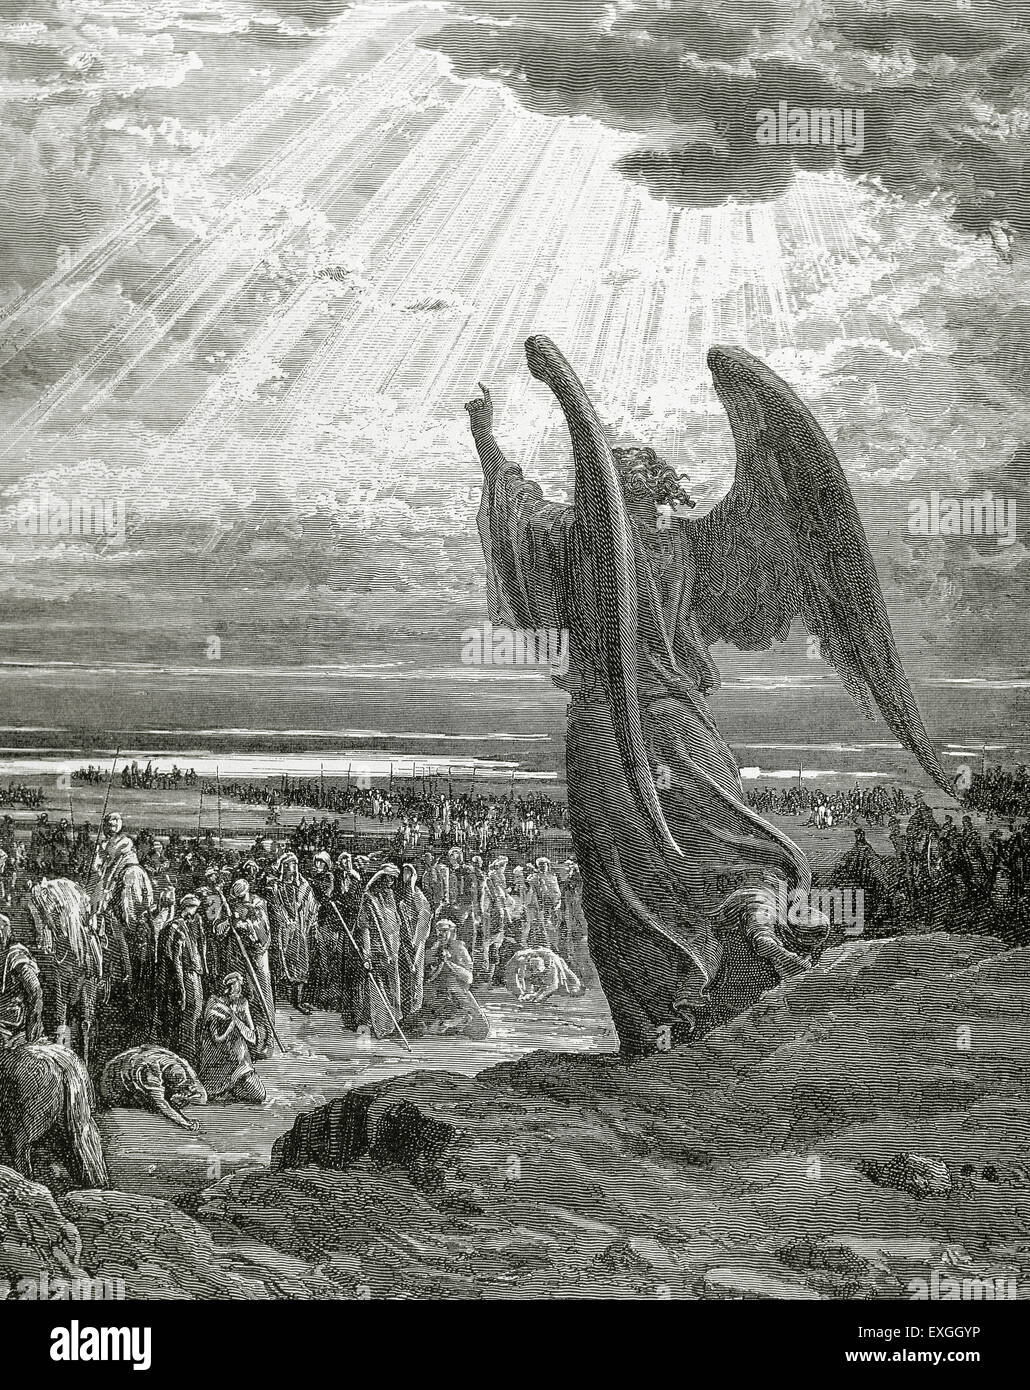 An angel appears Joshua's army. Book of Judges. Chapter 11, verses 1-5. Engraving by Gustave Dore (1832-1883). Stock Photo